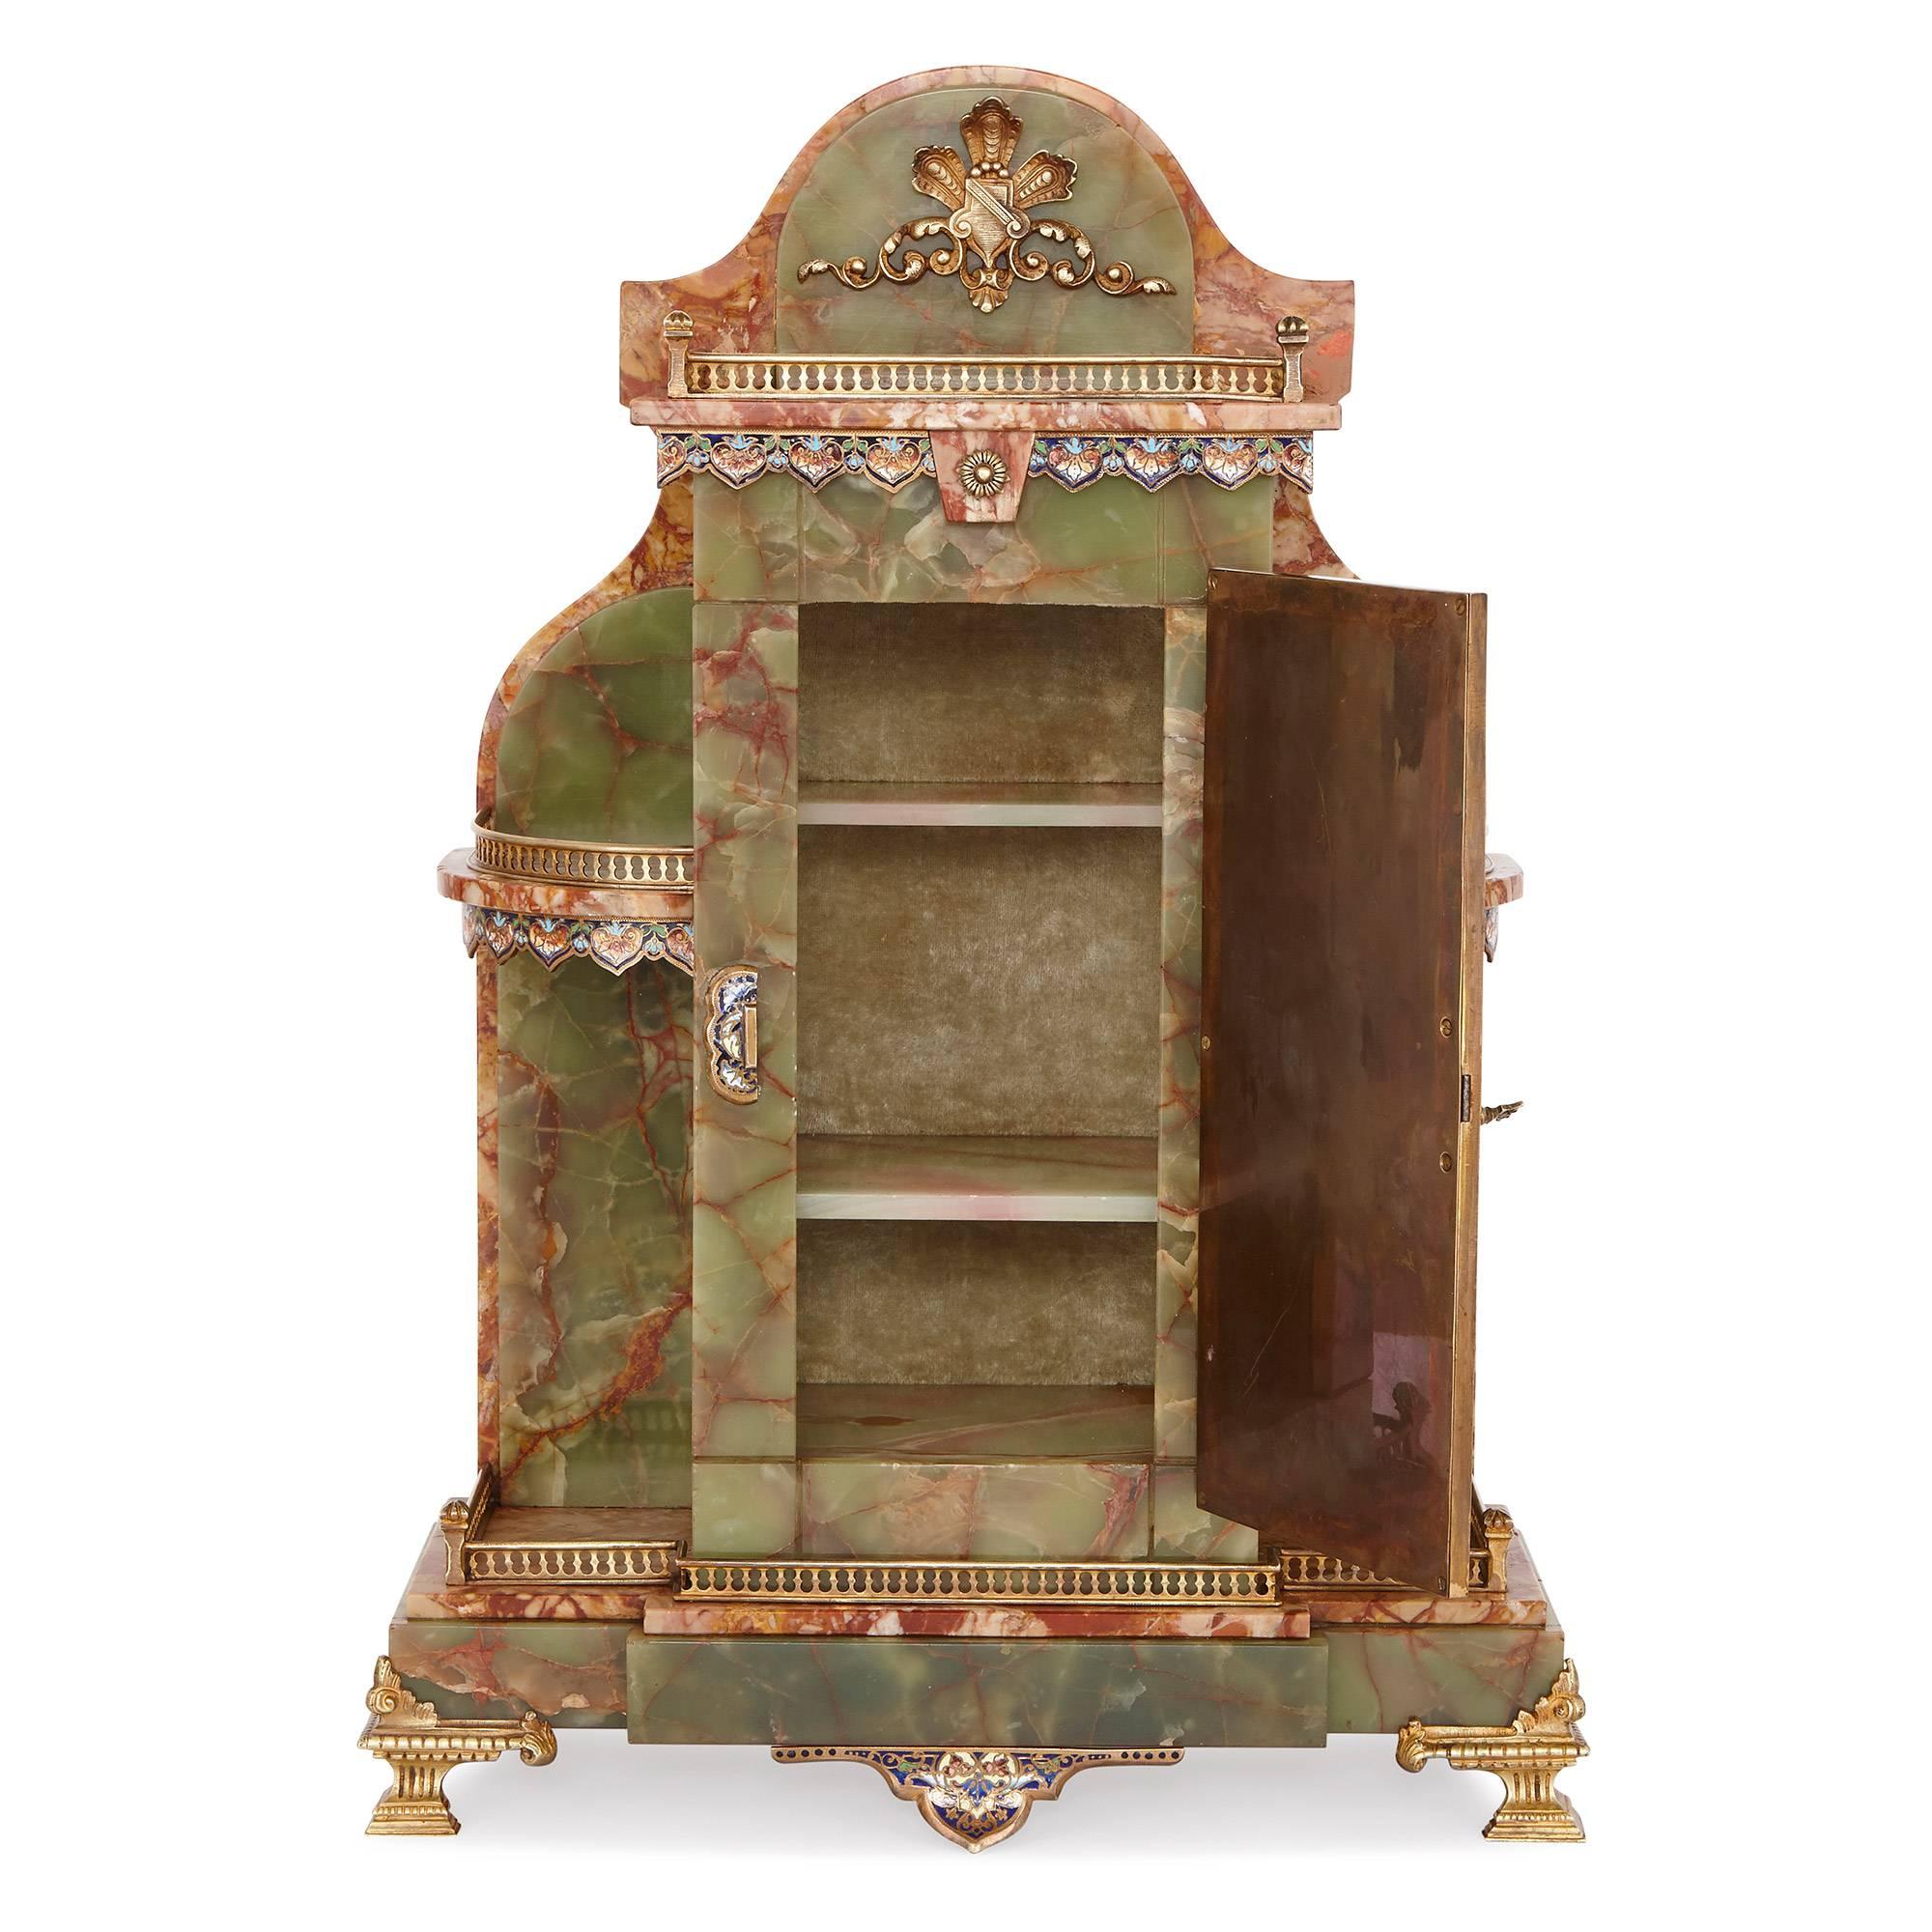 This elegant dressing table cabinet uses precious materials on a delicate scale, resulting in a piece that is both practical and luxurious. 

The cabinet is crafted in green onyx and set with contrasting pink, veined marble, and has an